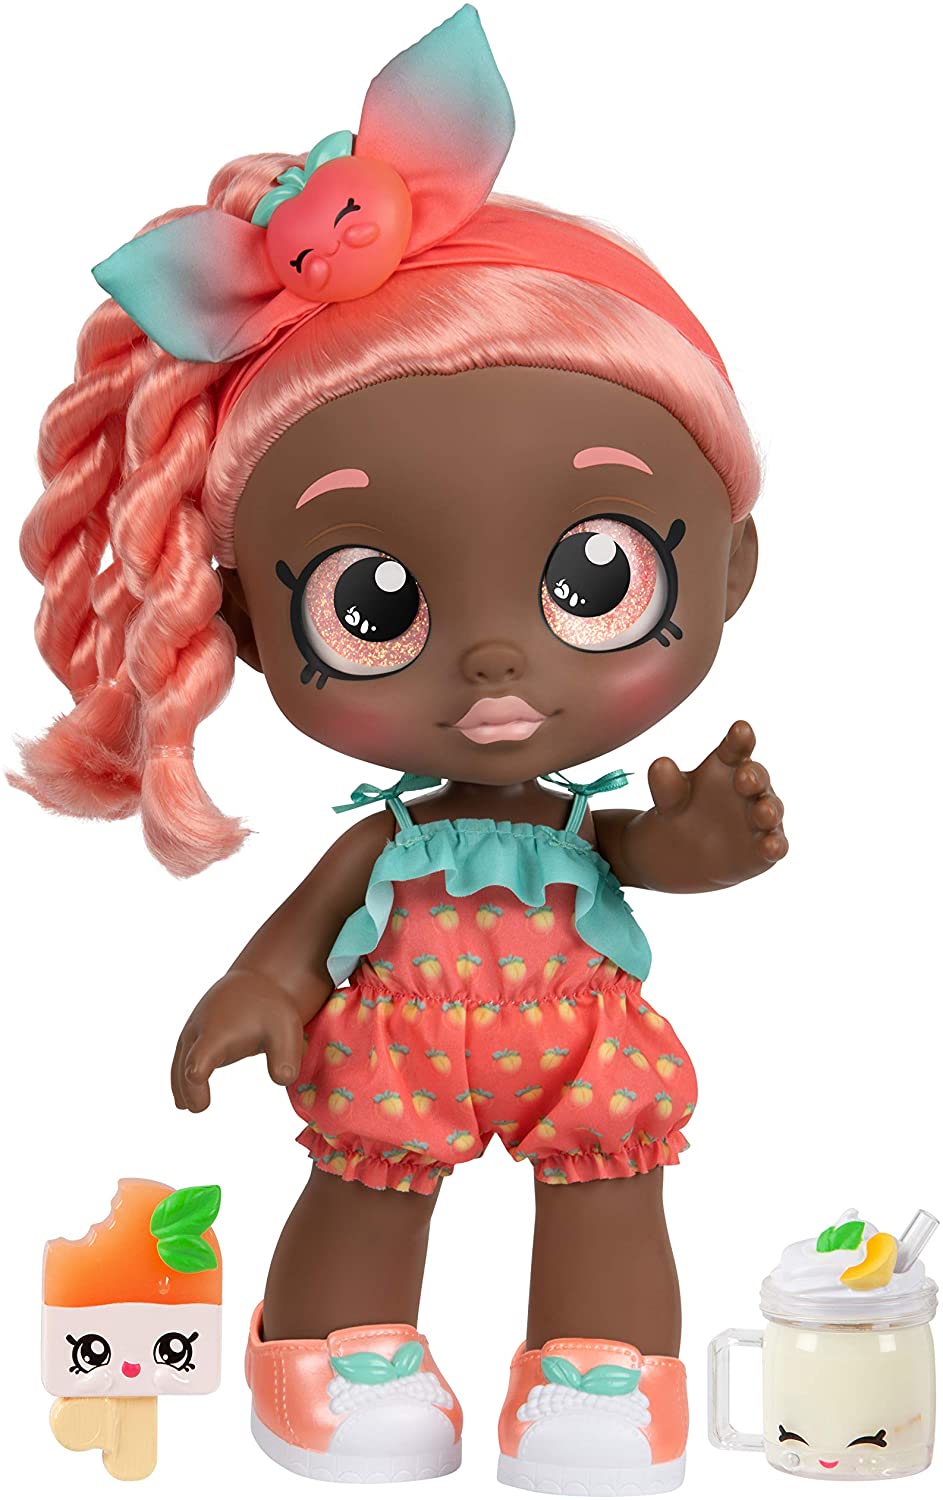 Prime Members: 11" Kindi Kids Snack Time Friends (Summer Peaches or Marsha Mellow) $13 + Free Shipping